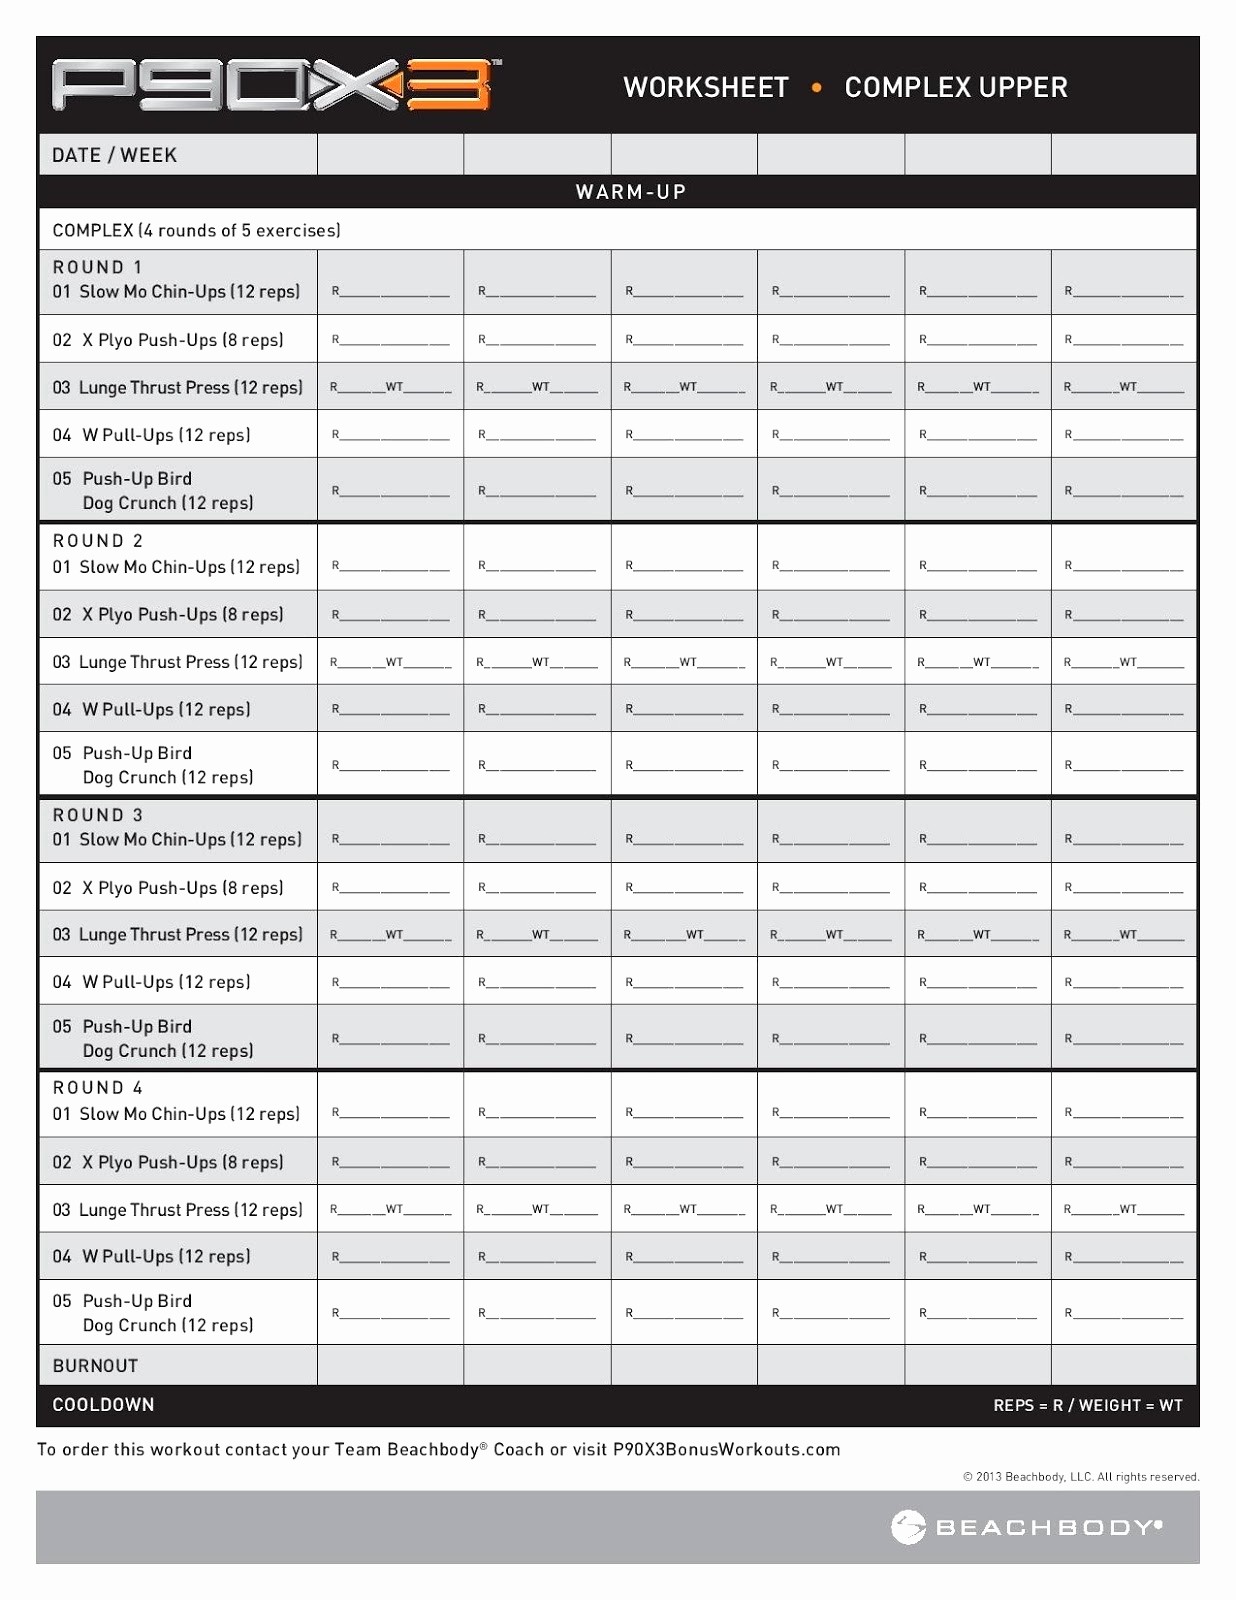 P90x Classic Worksheets Lovely Workout Sheets Pdf Best Document Chest And Back Worksheet